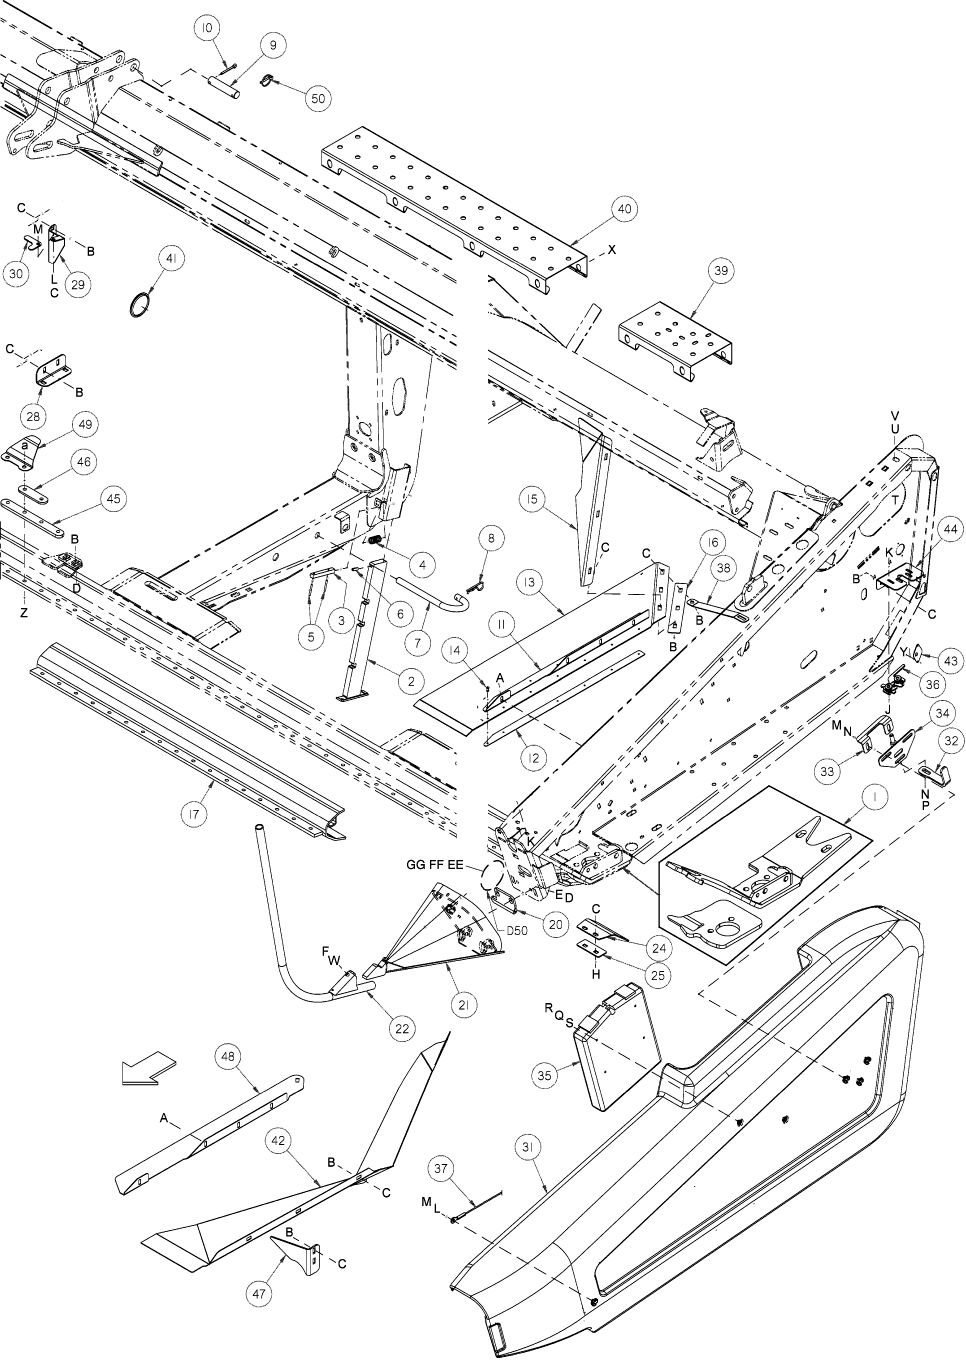 09-01 FRAME AND COMPONENTS